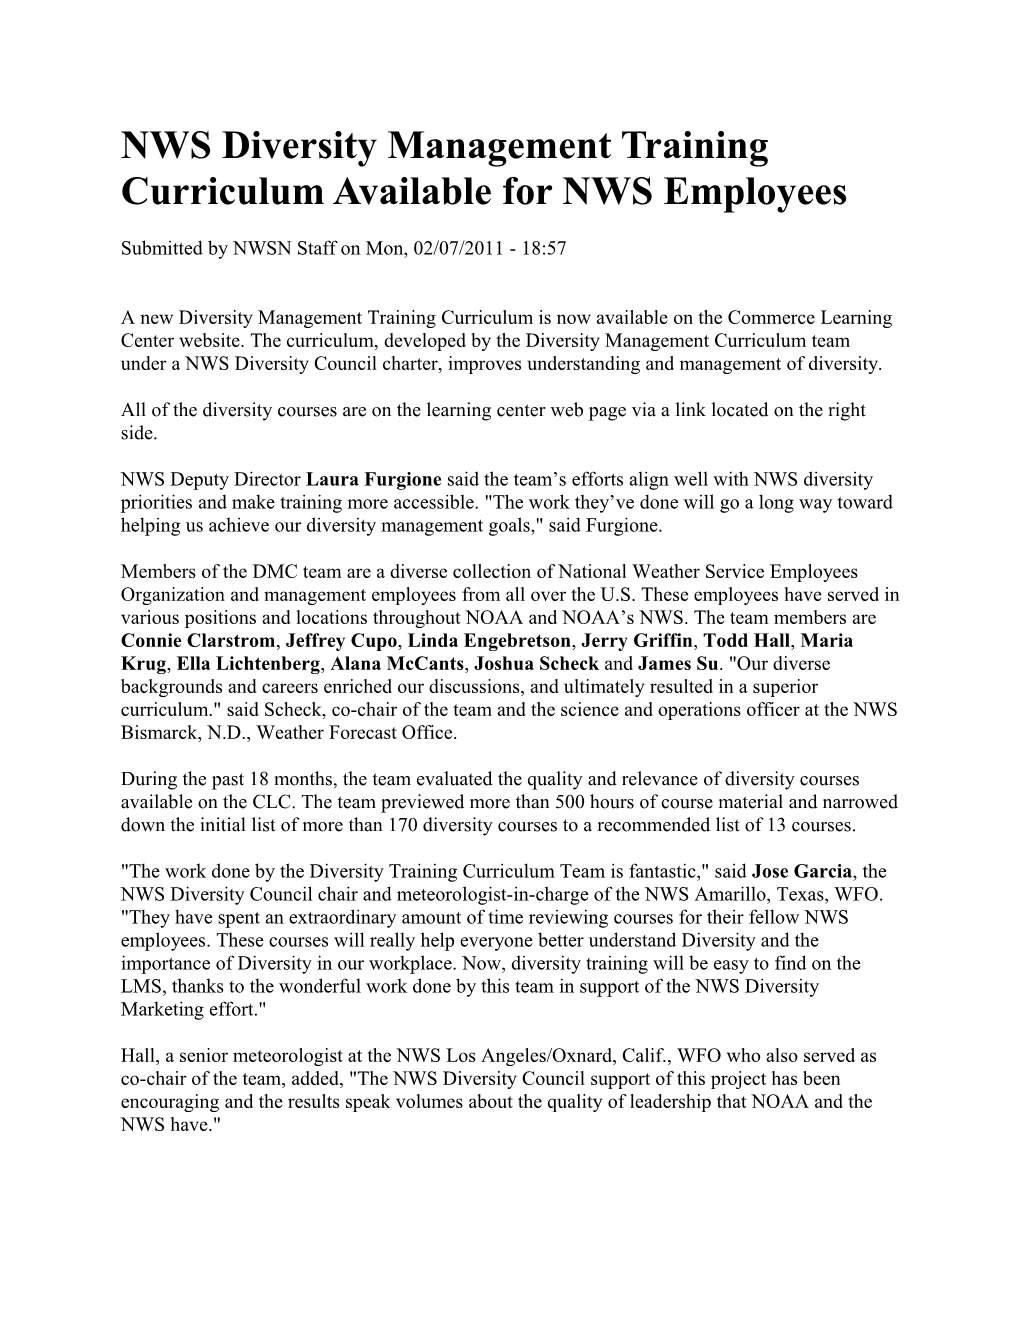 NWS Diversity Management Training Curriculum Available for NWS Employees